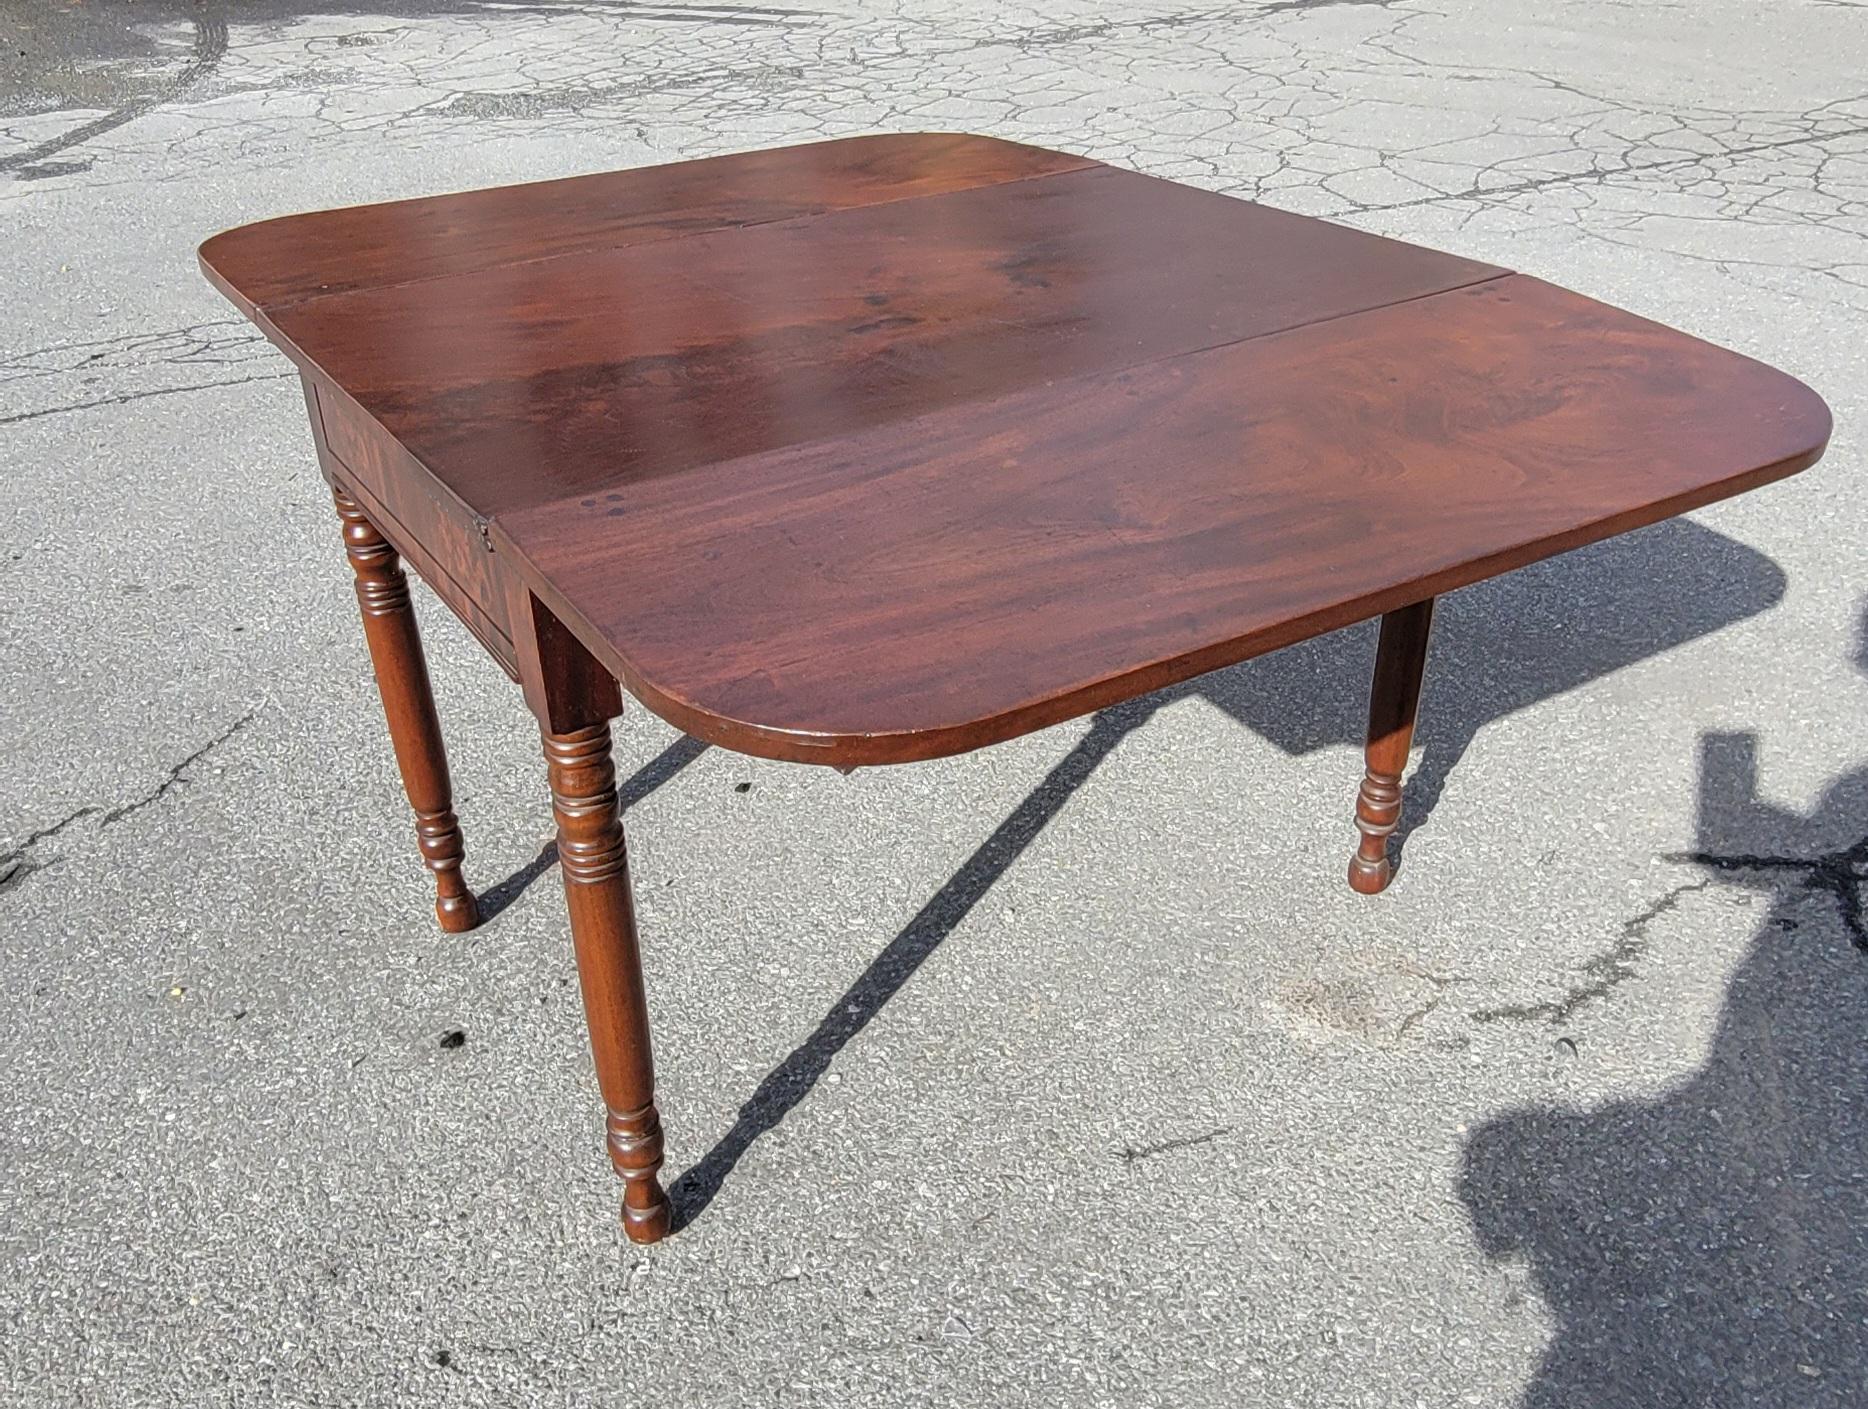 19th Century American Empire Federal Flame Mahogany Drop-Leaf Dining Table For Sale 8